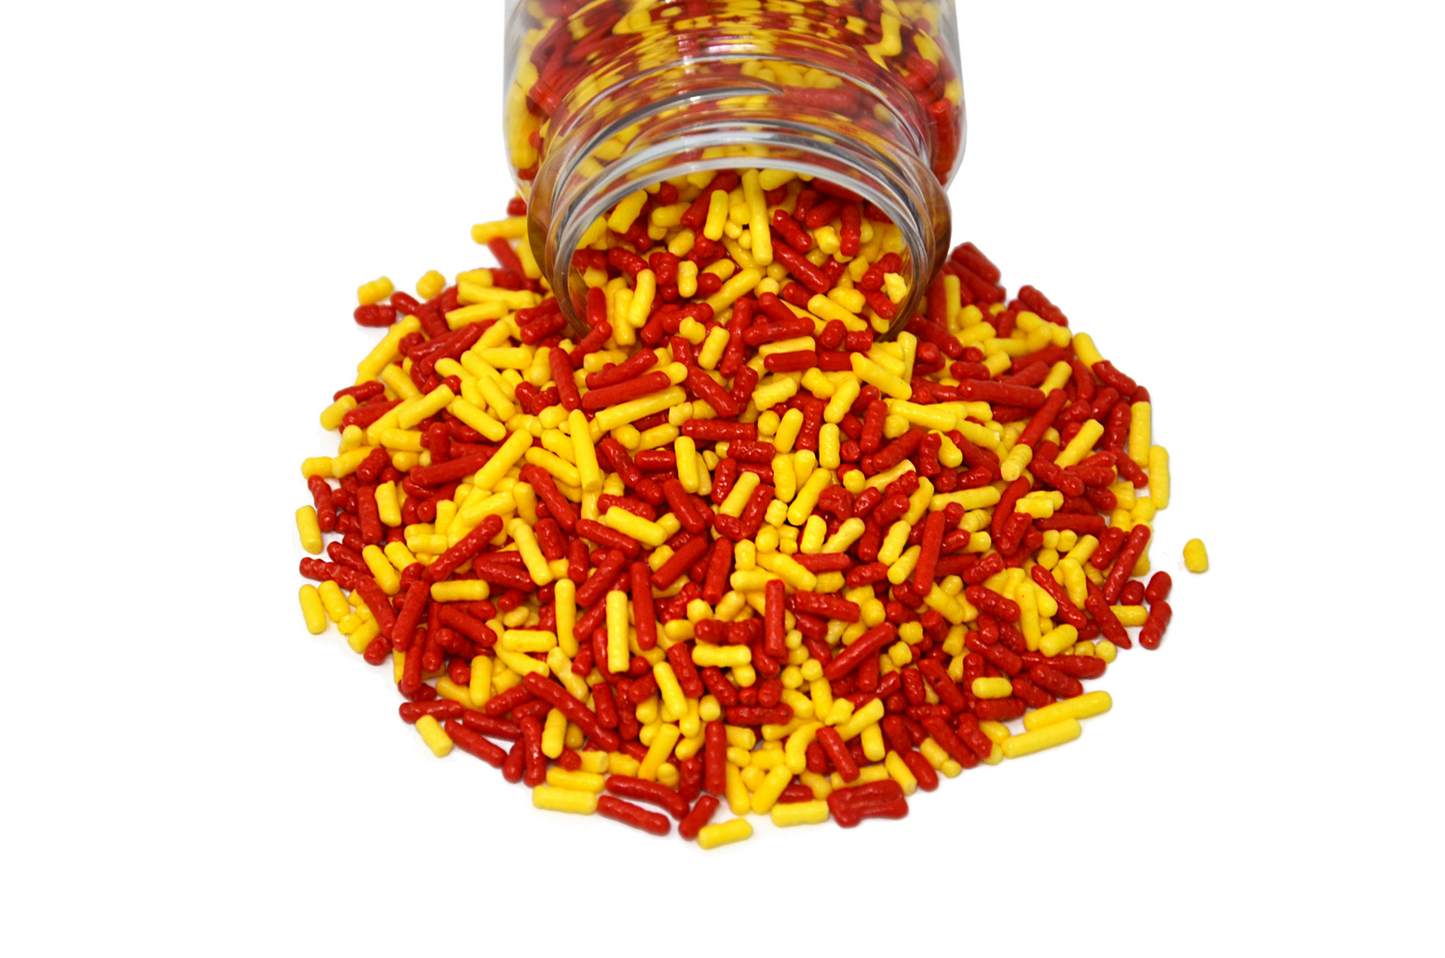 The Big Game: Red & Yellow Jimmy Mix 3oz Bottle